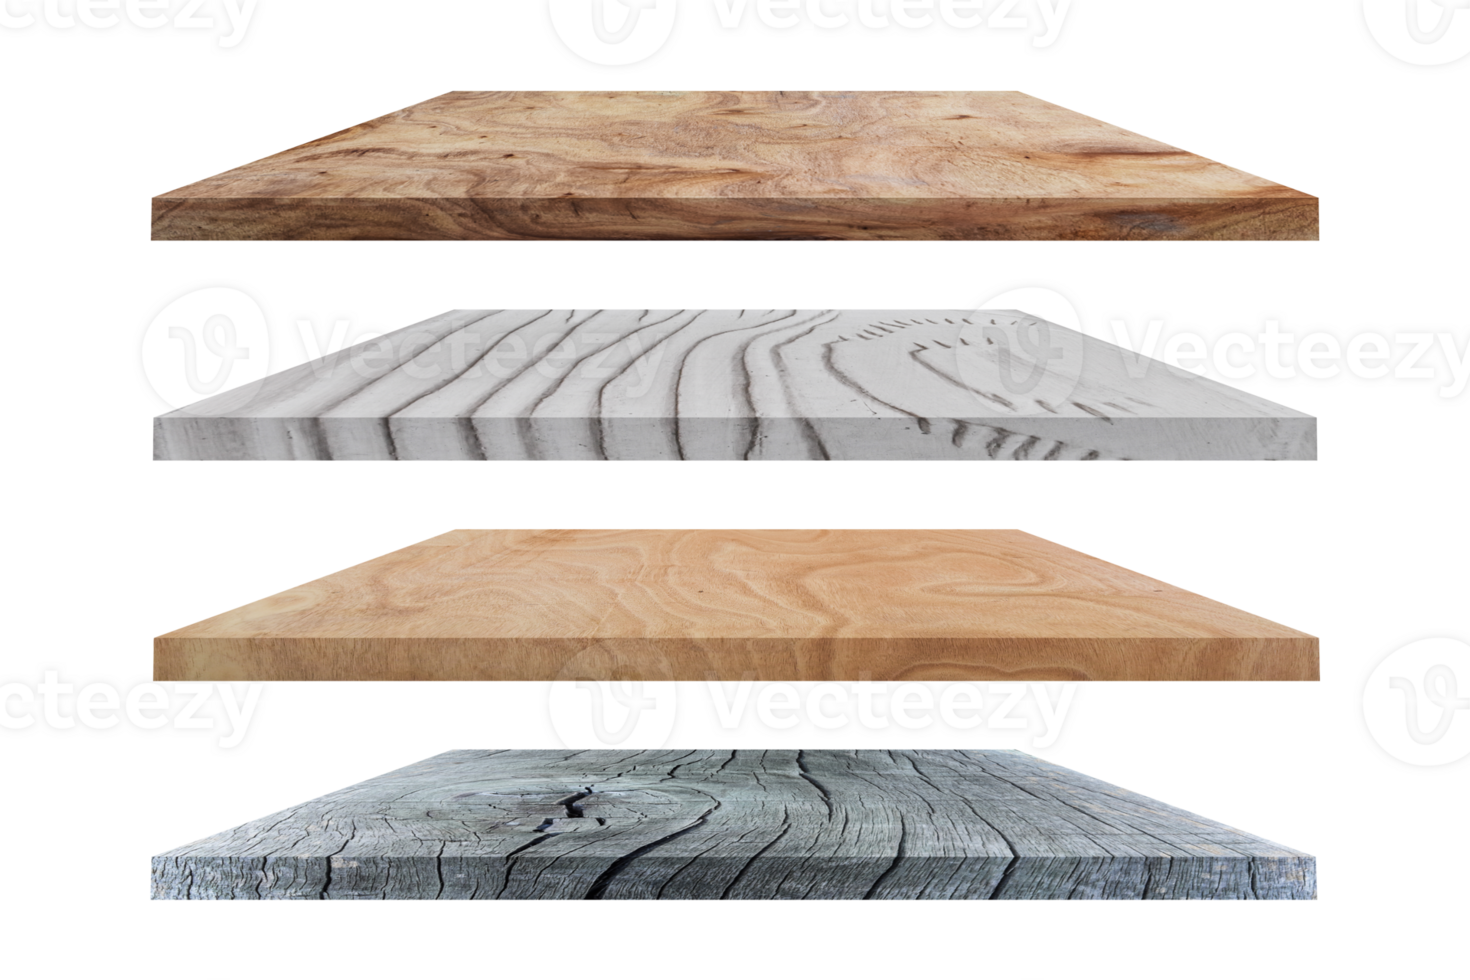 https://static.vecteezy.com/system/resources/previews/033/292/081/non_2x/set-of-wooden-flooring-isolated-on-transparent-background-file-format-png.png